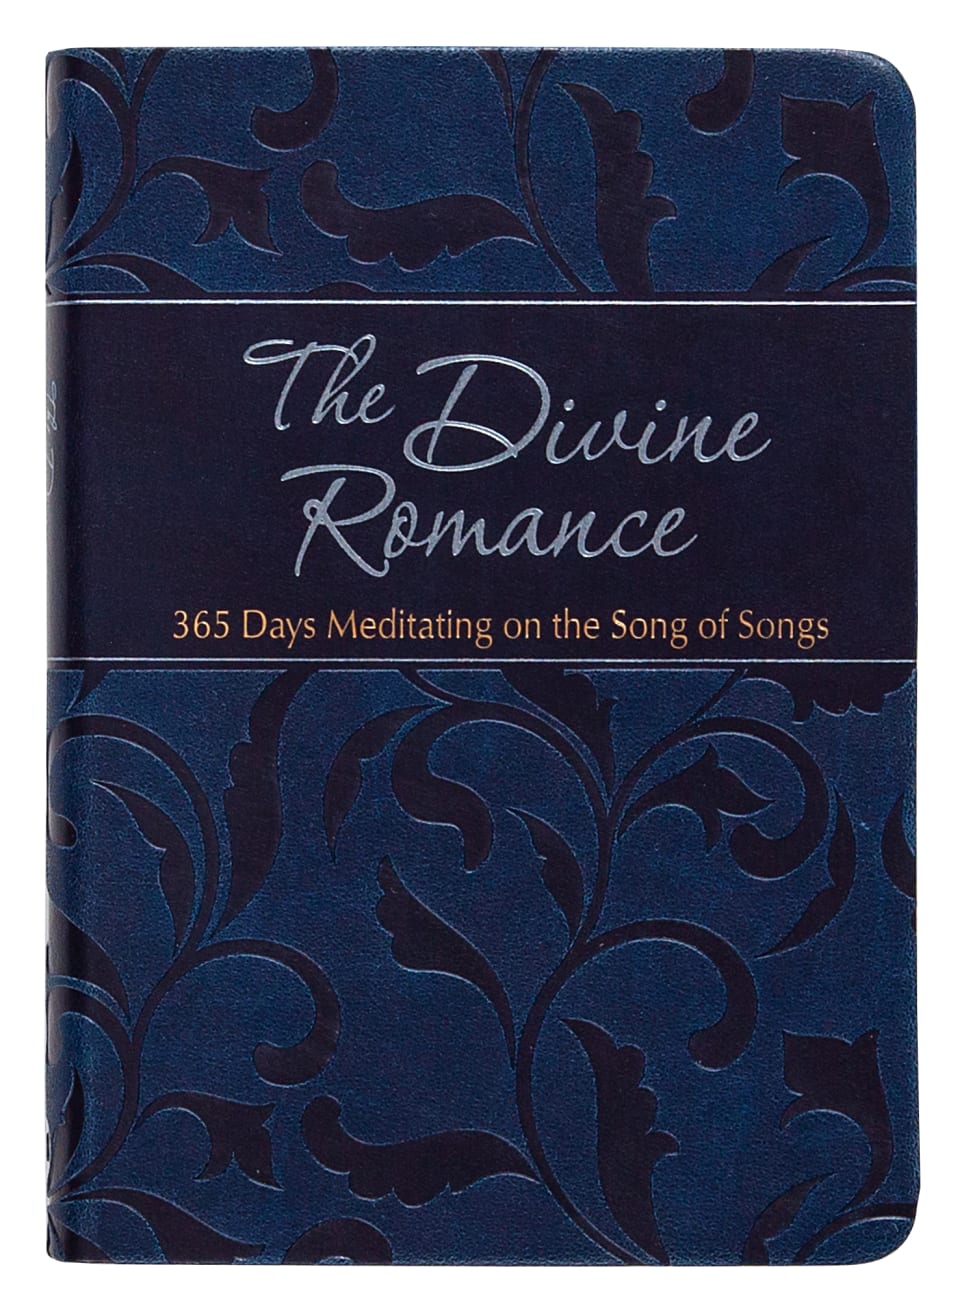 The Divine Romance: 365 Days Meditating on the Song of Songs Imitation Leather